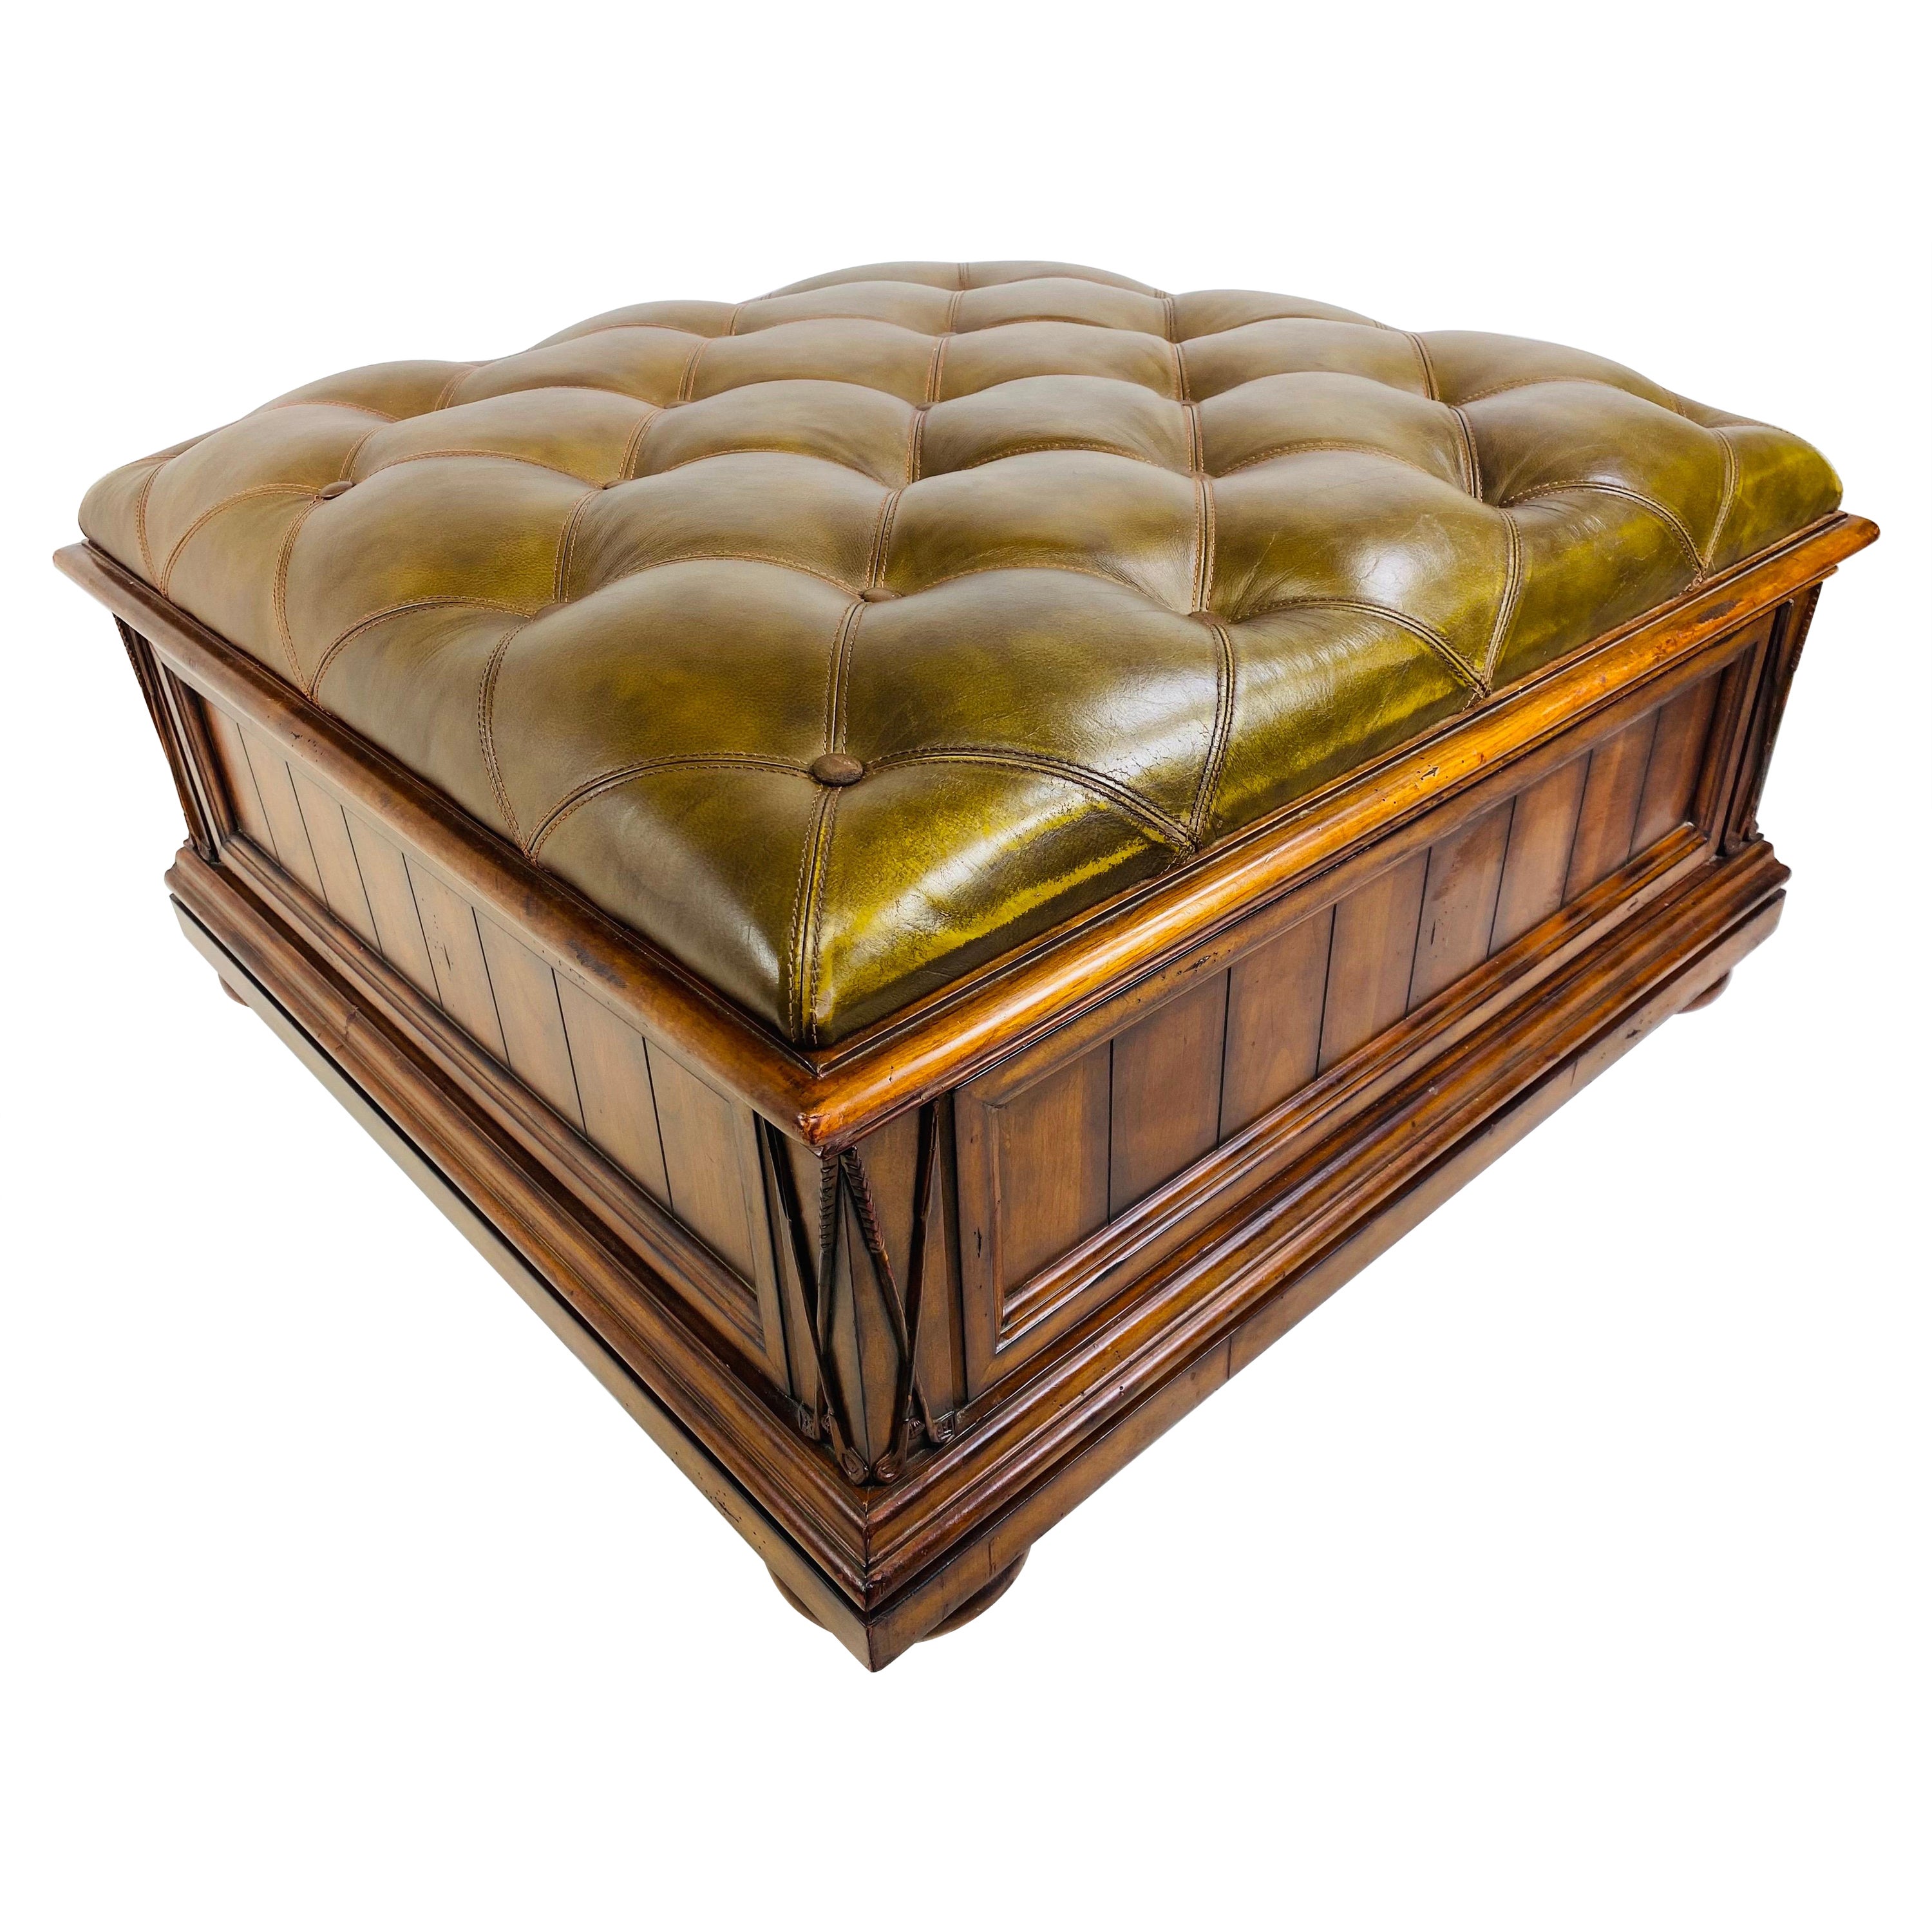 Handsome oversized tufted leather ottoman/trunk after Ralph Lauren For Sale